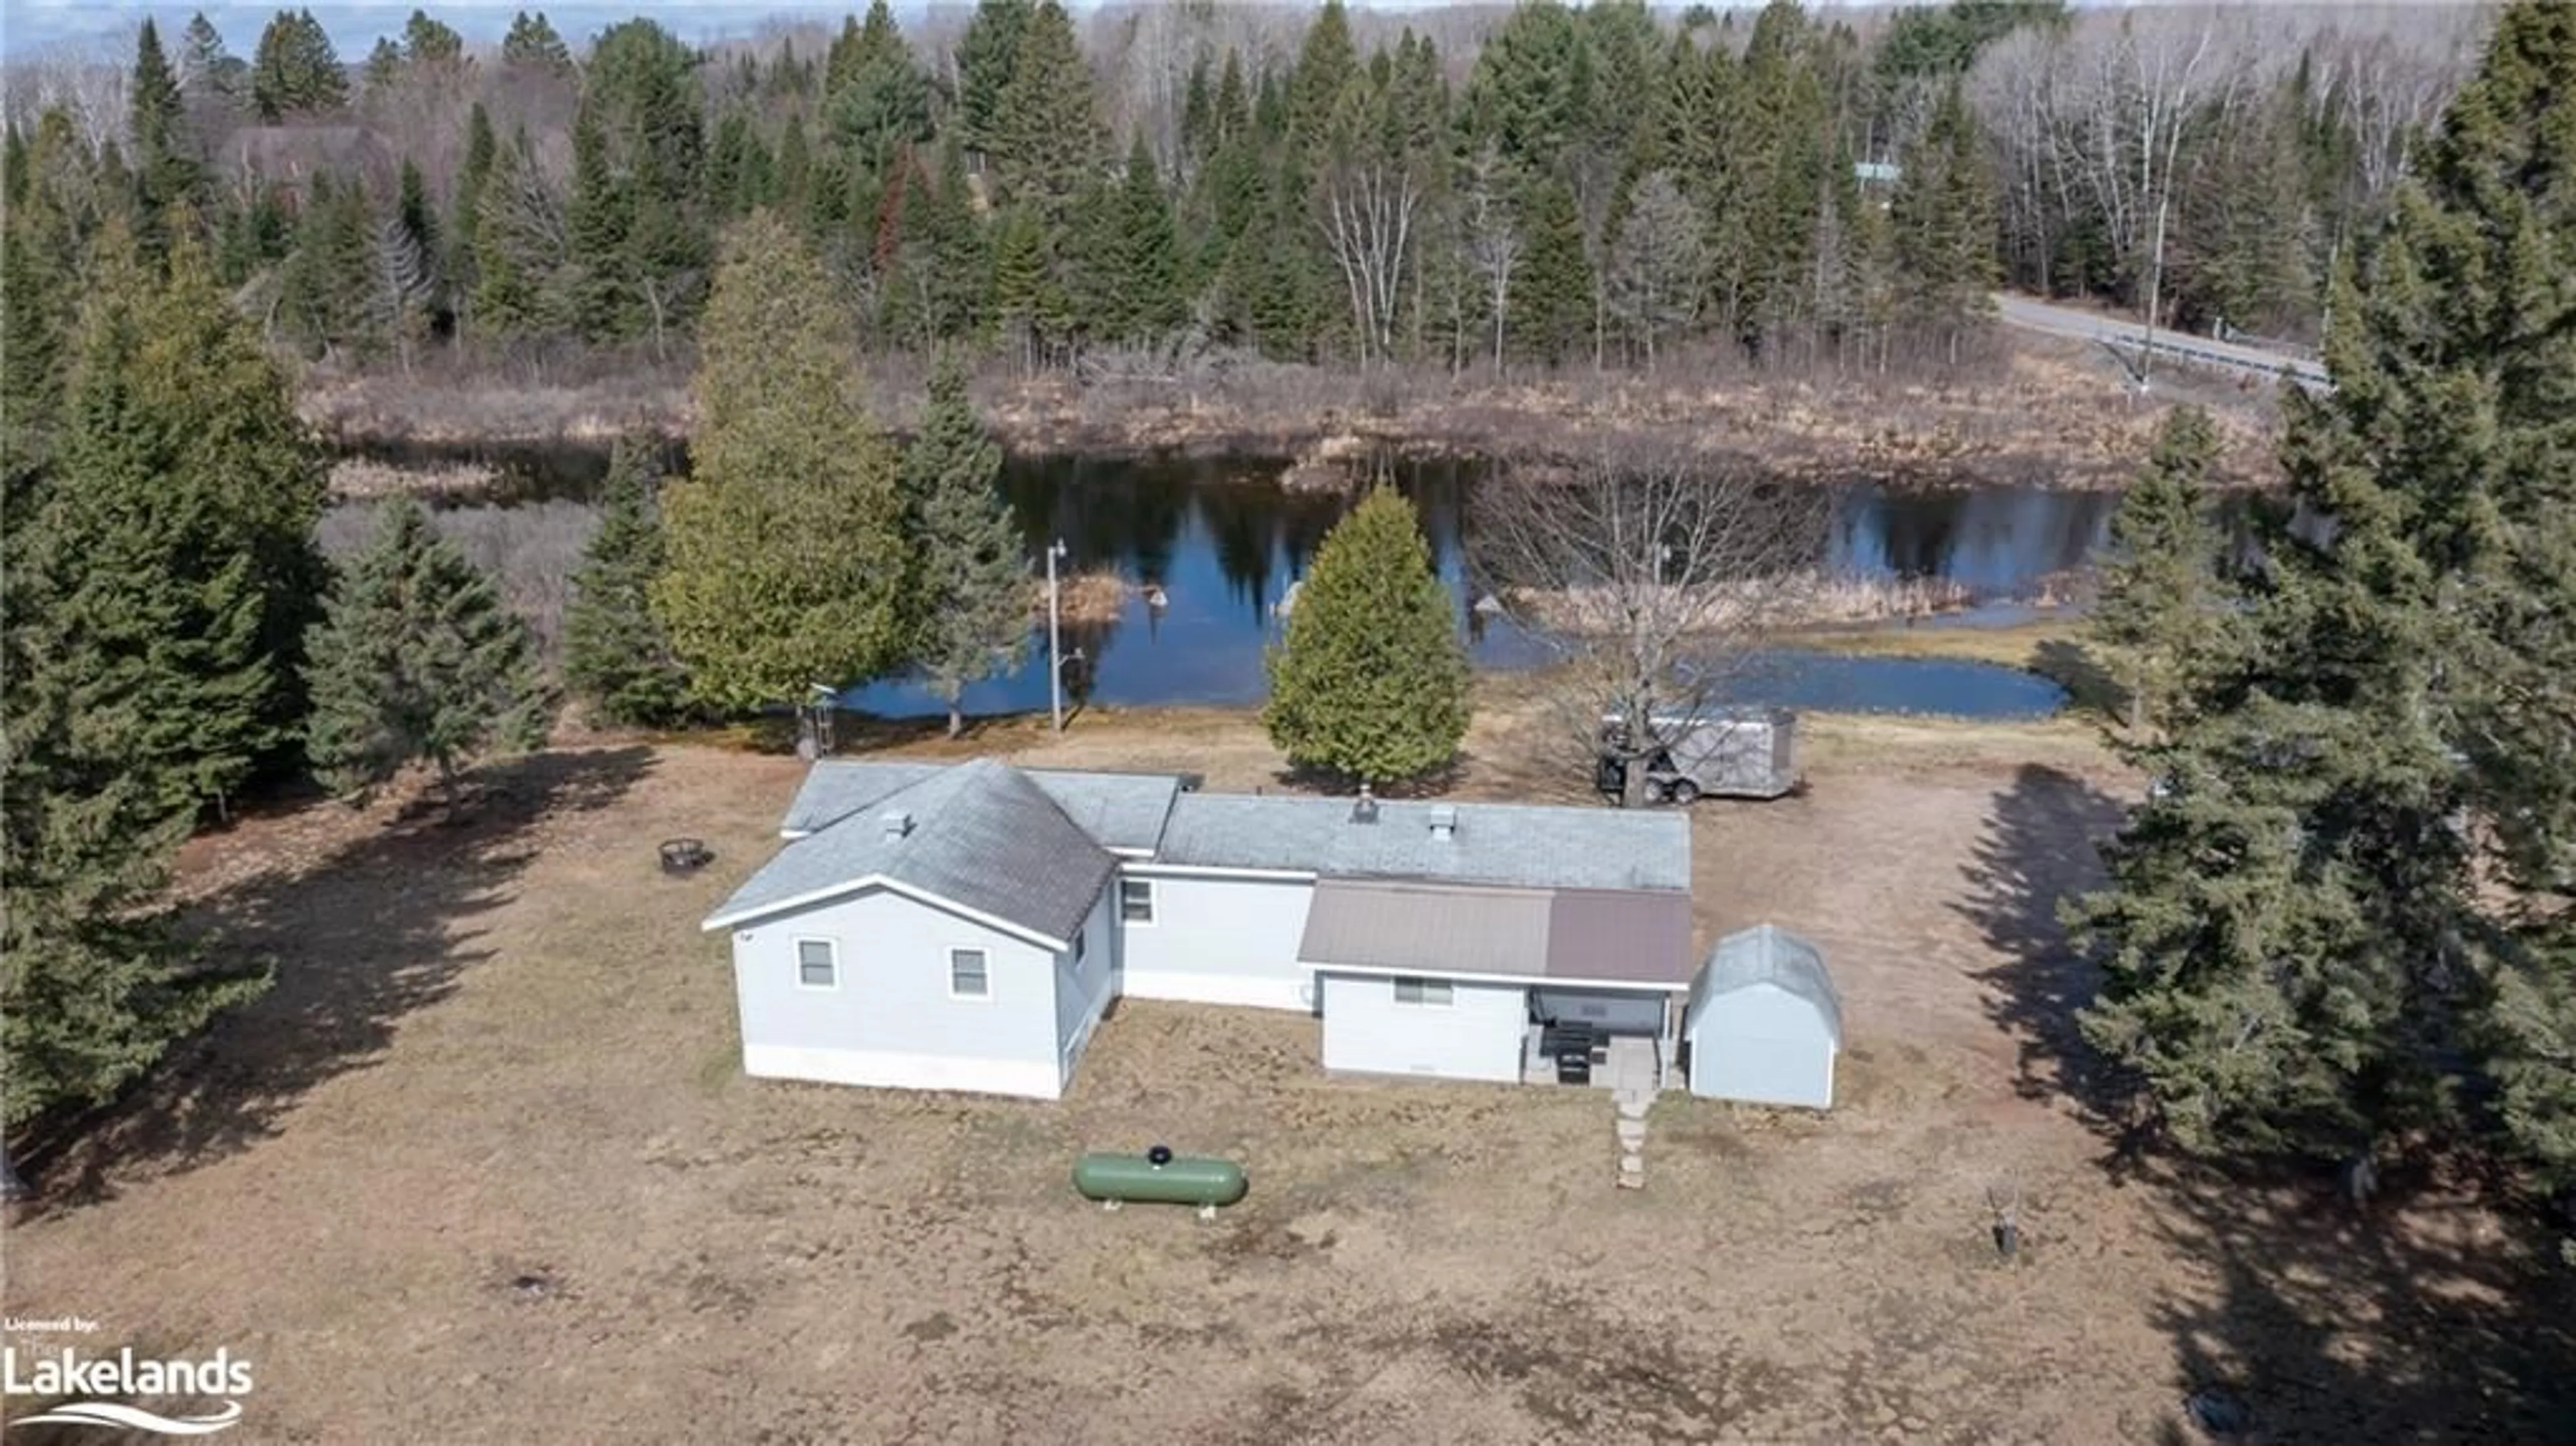 Cottage for 1653 Pickerel And Jack Lake Rd, Burk's Falls Ontario P0A 1C0